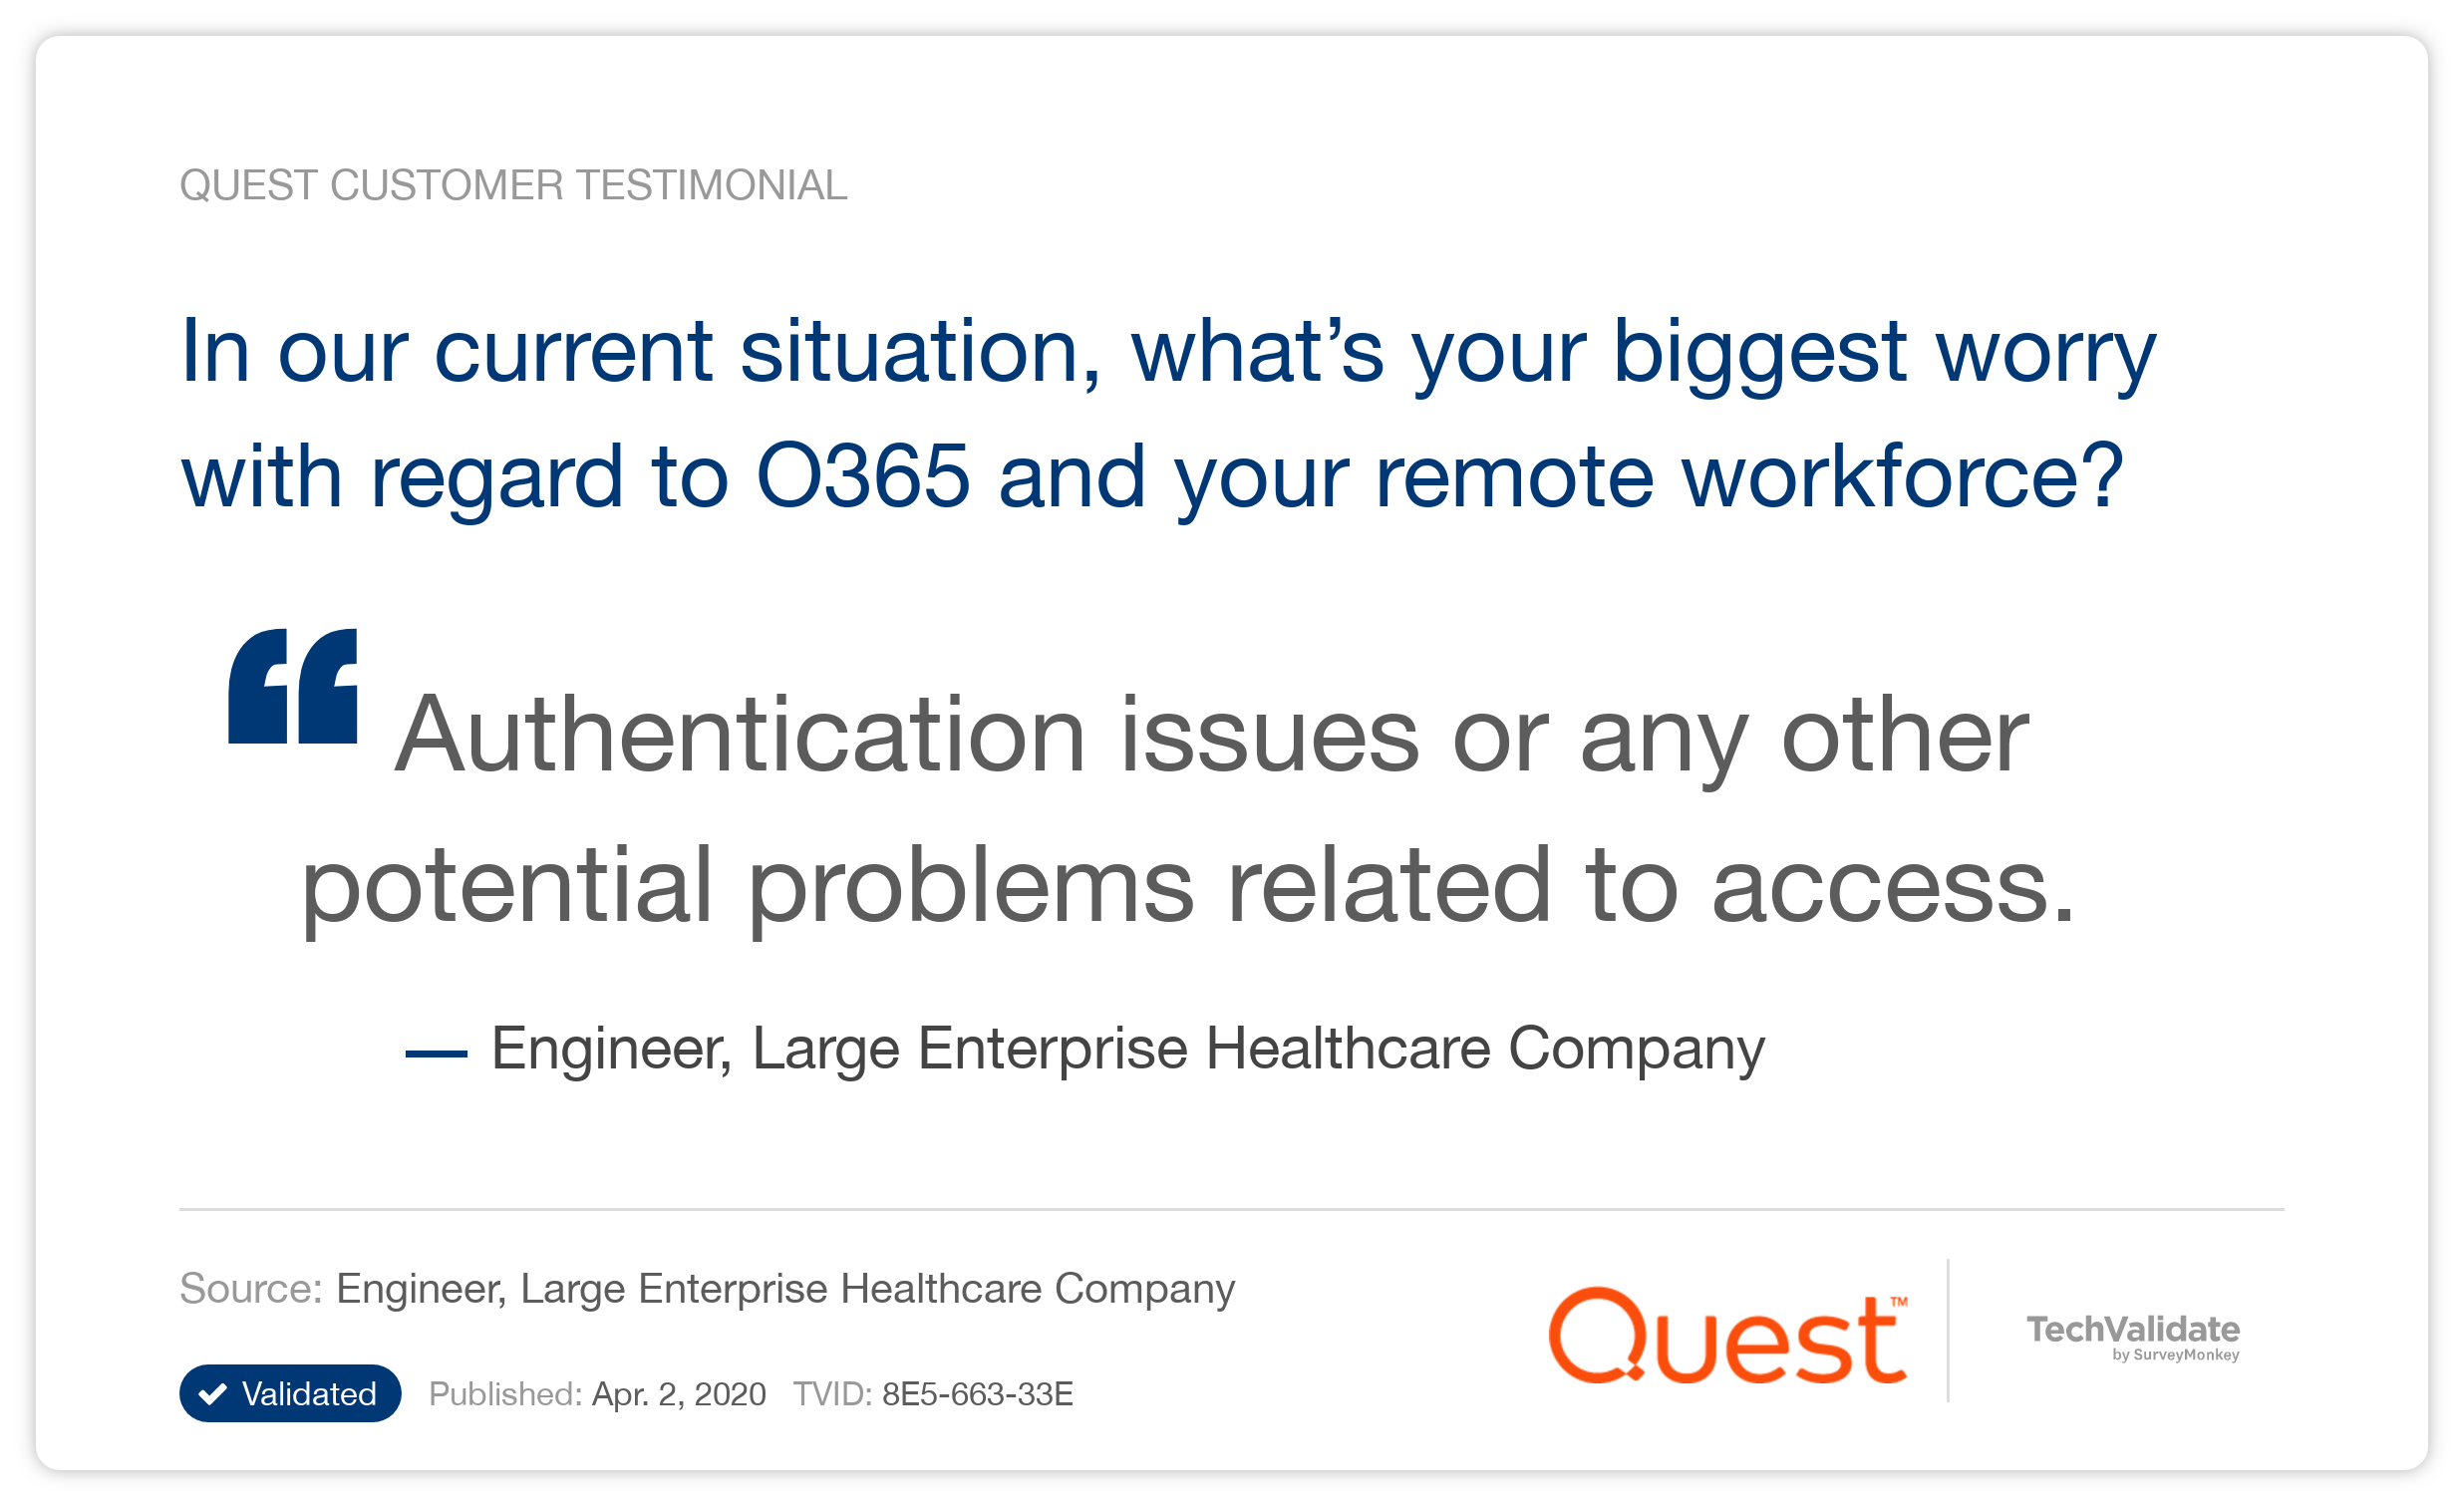 In our current situation, what's your biggest worry with regard to O365 and your remote workforce?